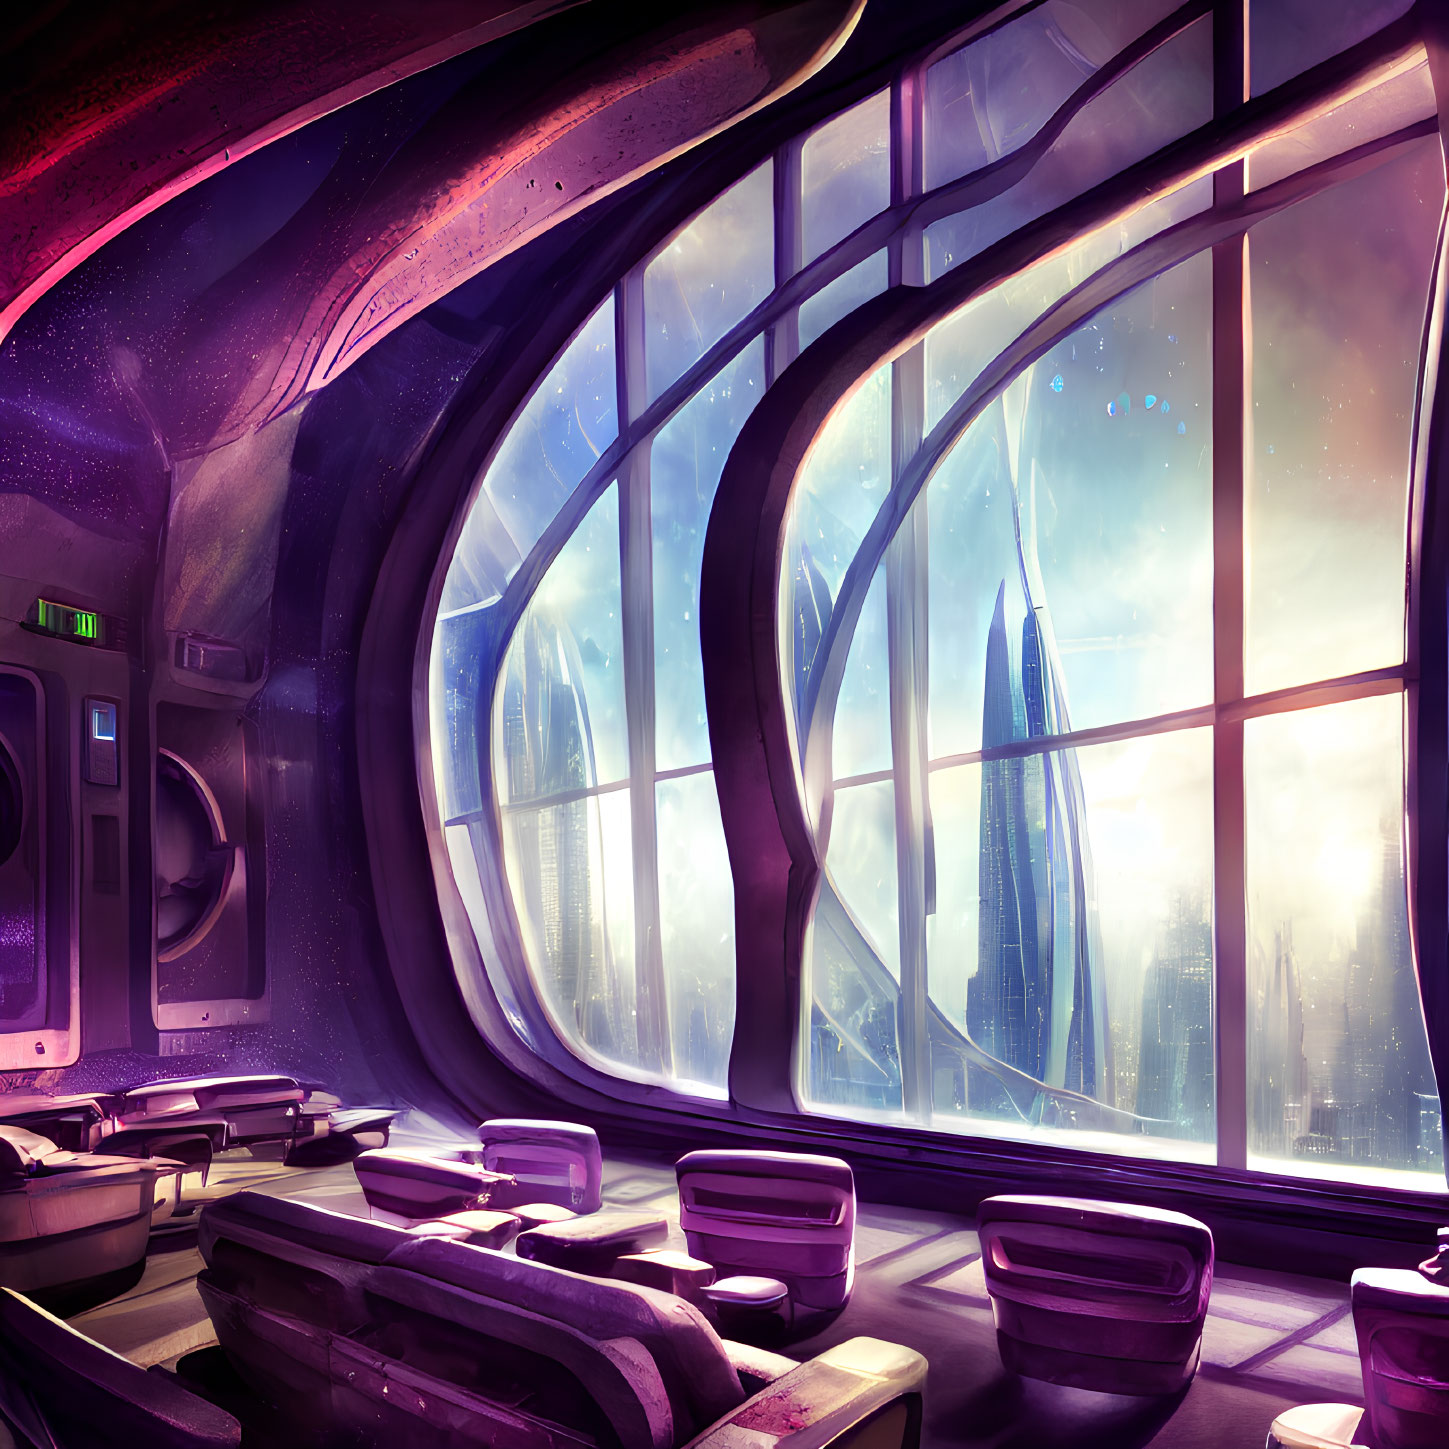 Futuristic interior with large windows overlooking cityscape and skyscrapers in pink and purple hues under